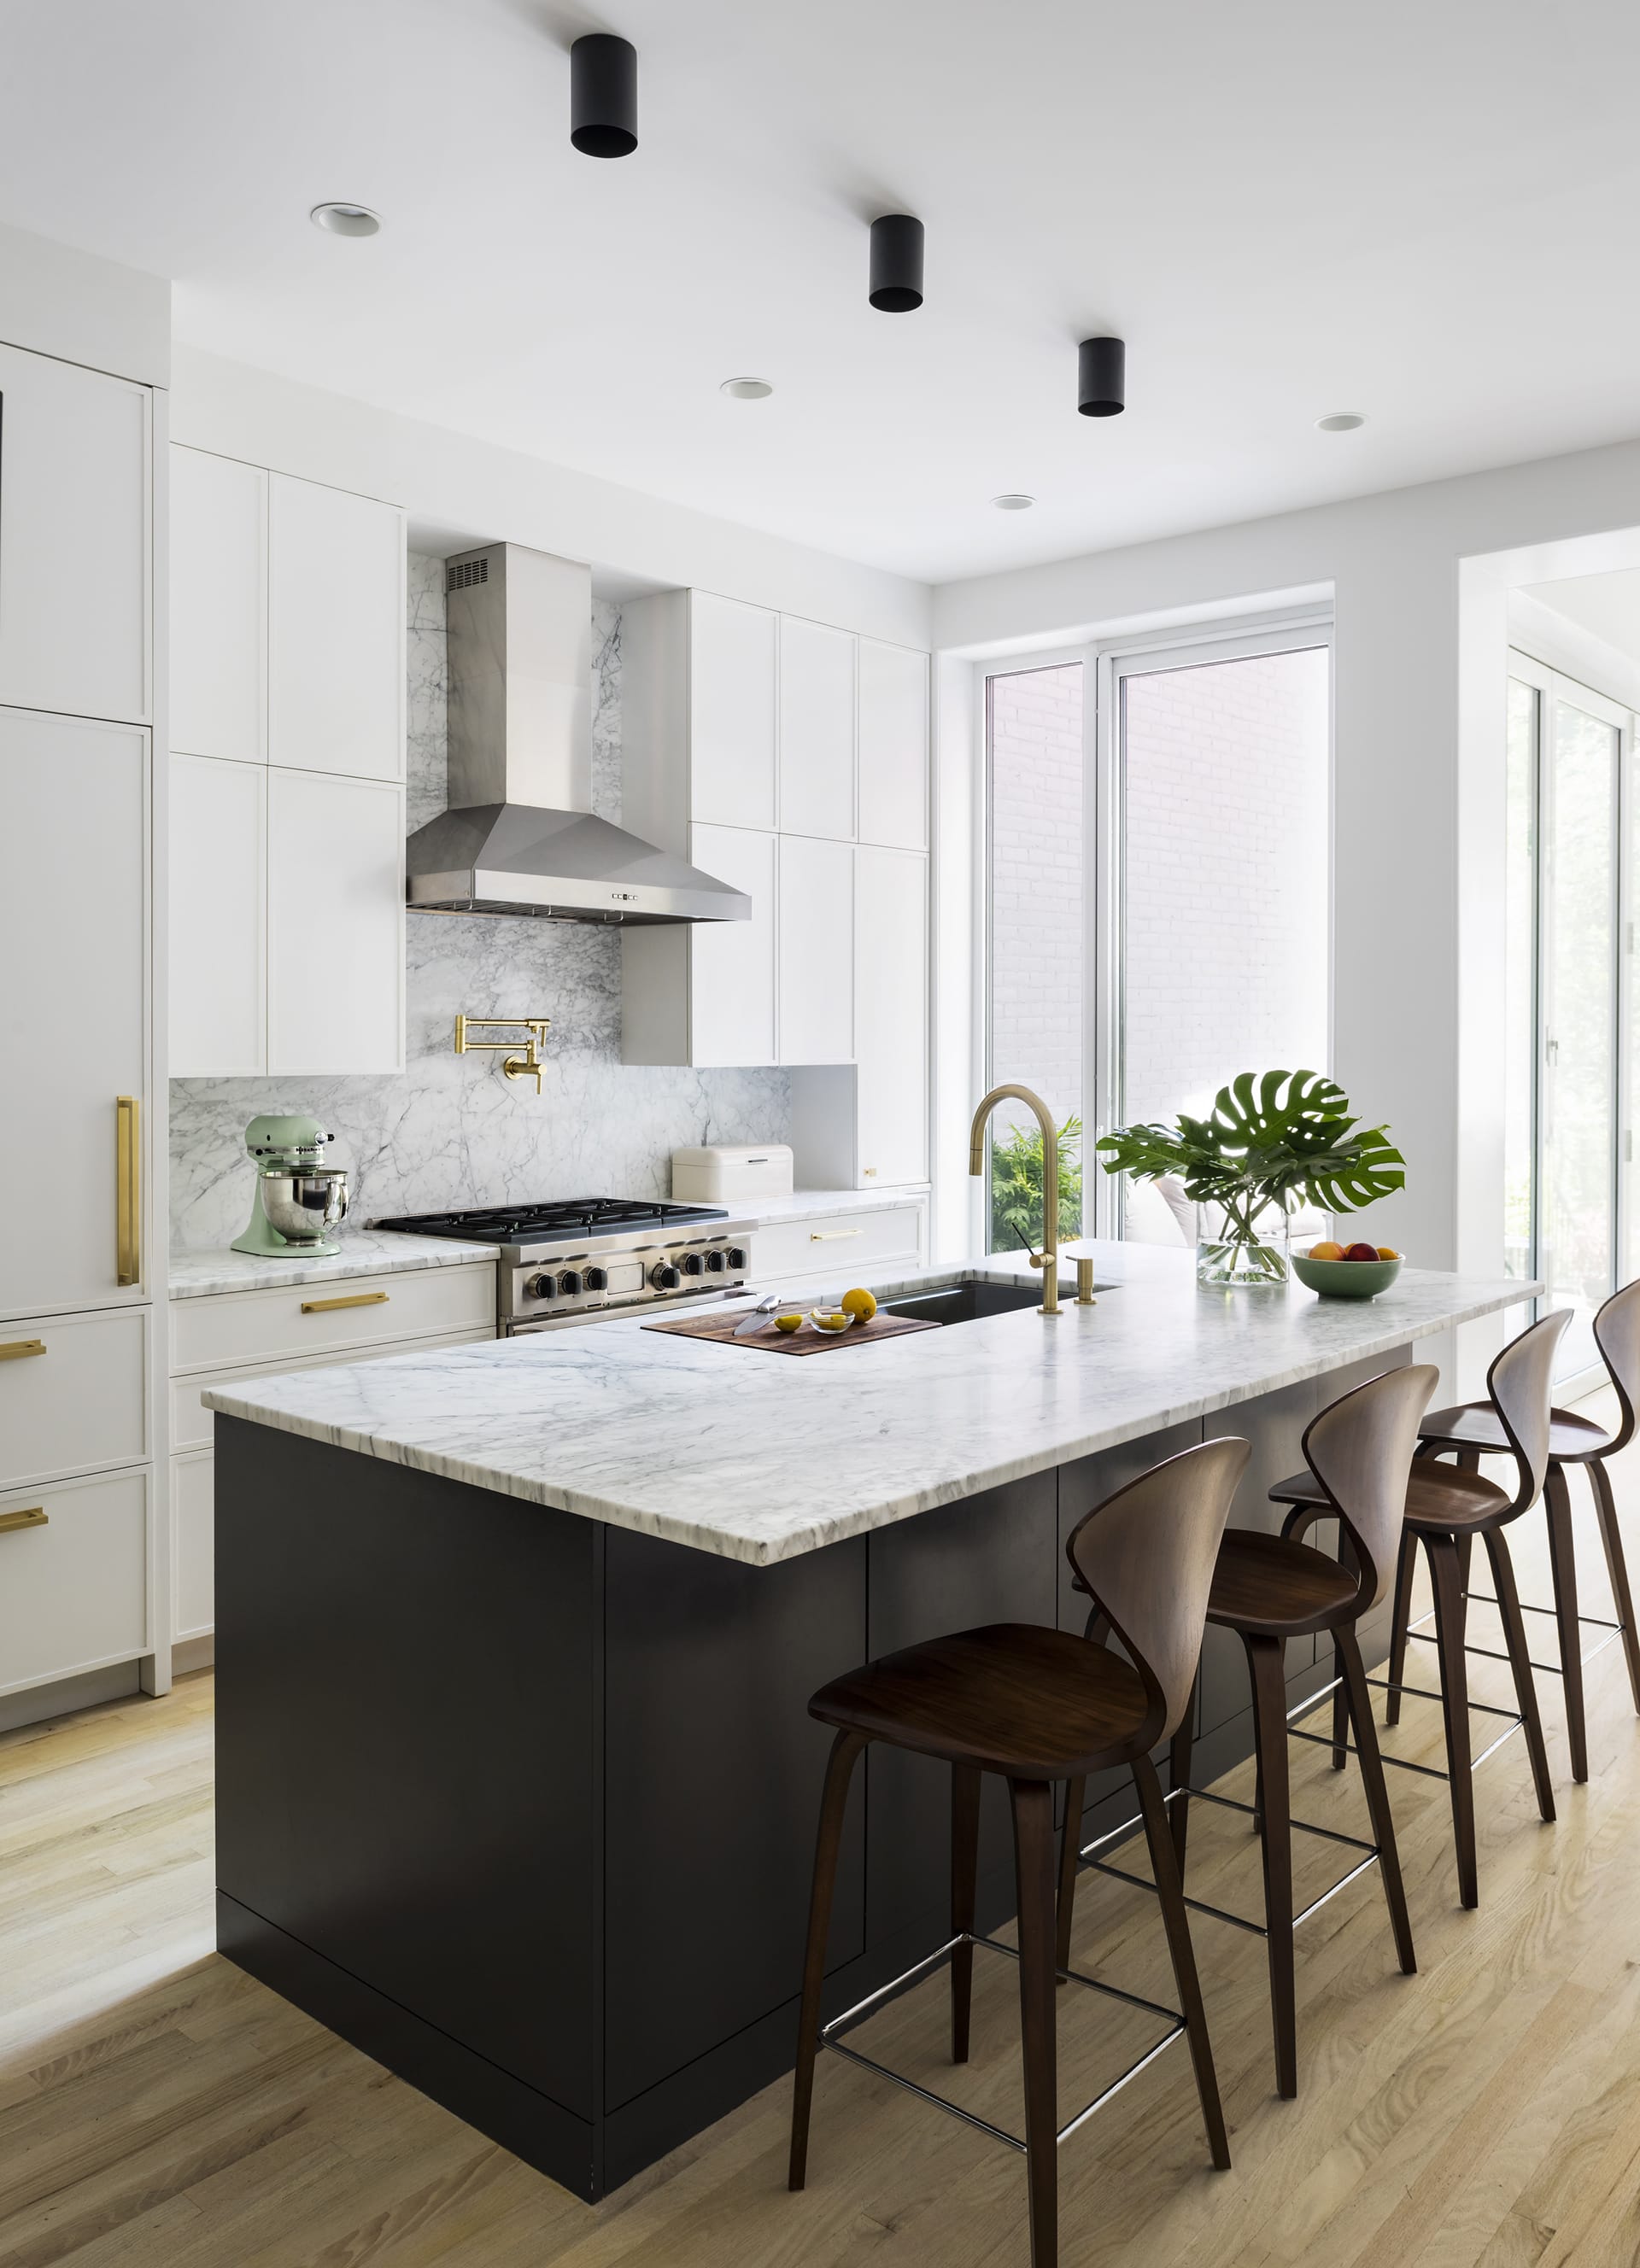 Kitchen in a Prospect Heights home with white millwork, a black island, and white marble countertops.